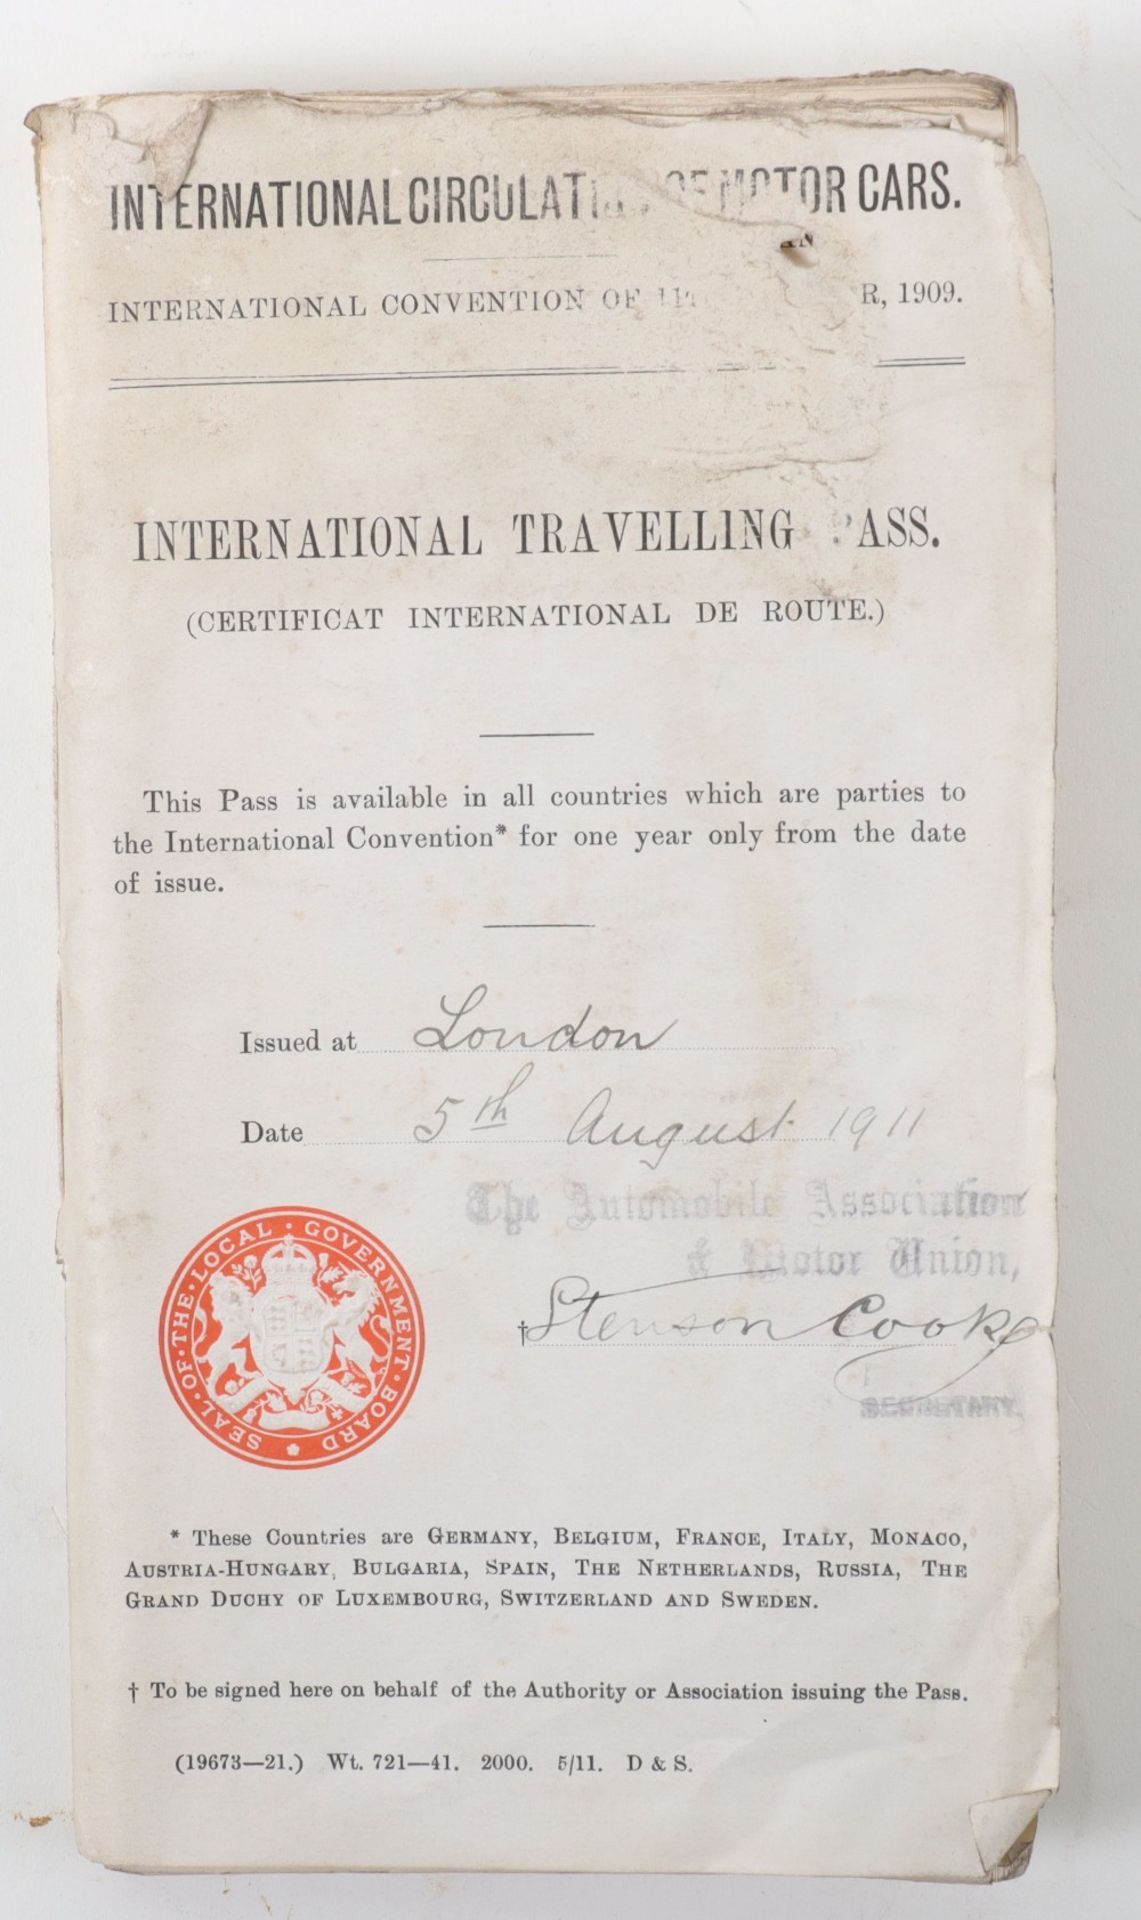 International Travelling Pass (Certificate international de Route) Issued August 1911 for Triumph Mo